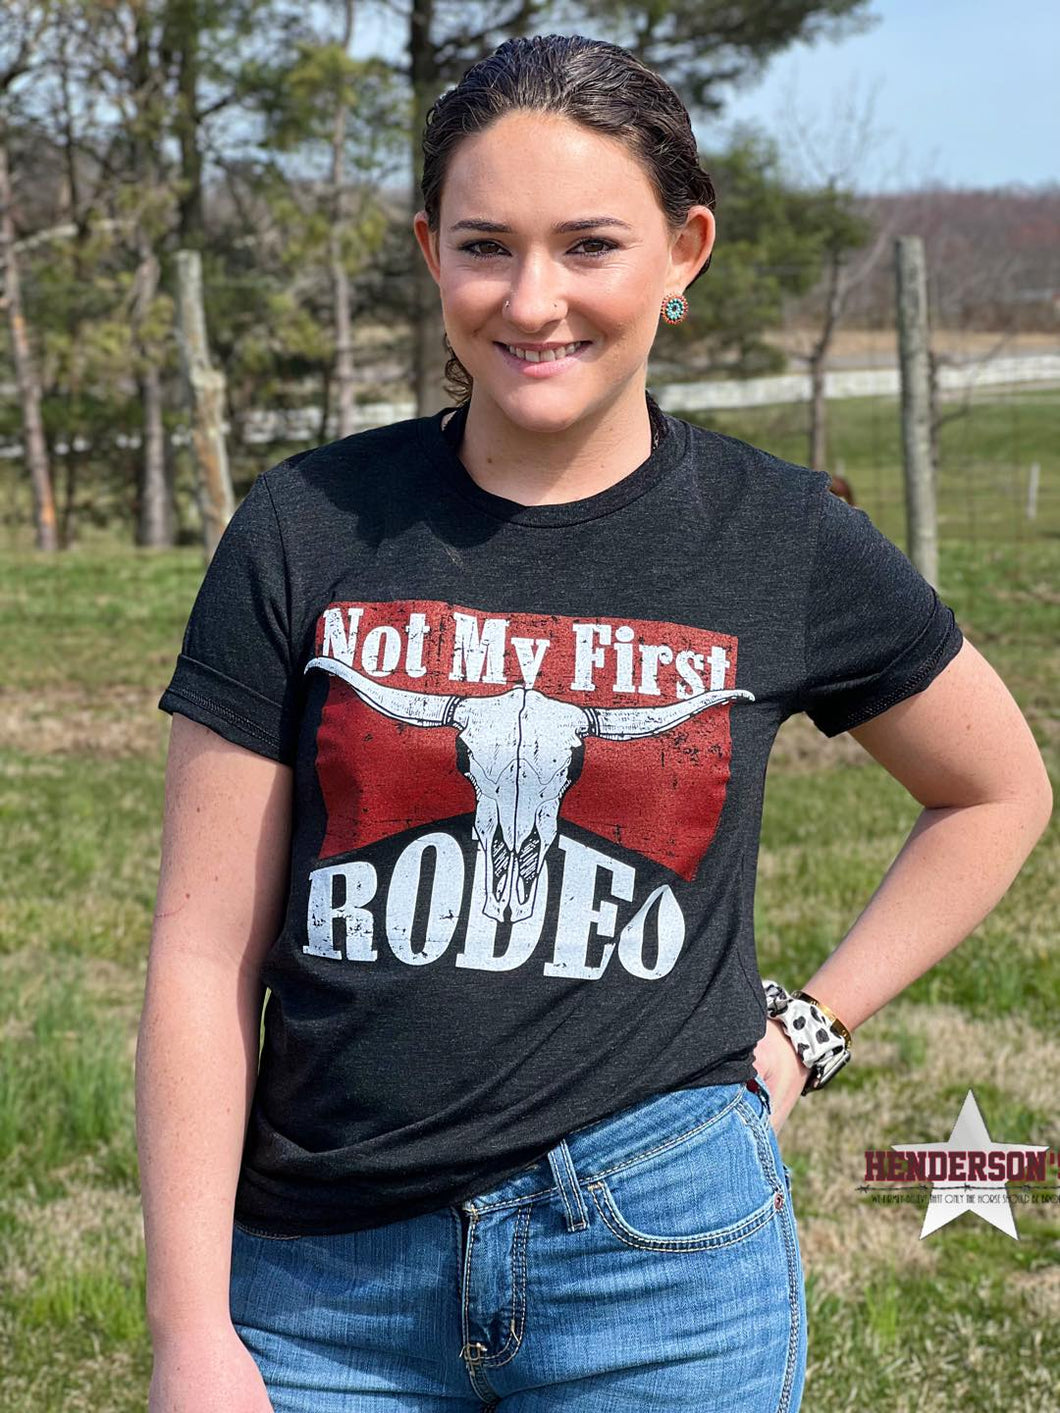 Not My First Rodeo Tee - Henderson's Western Store